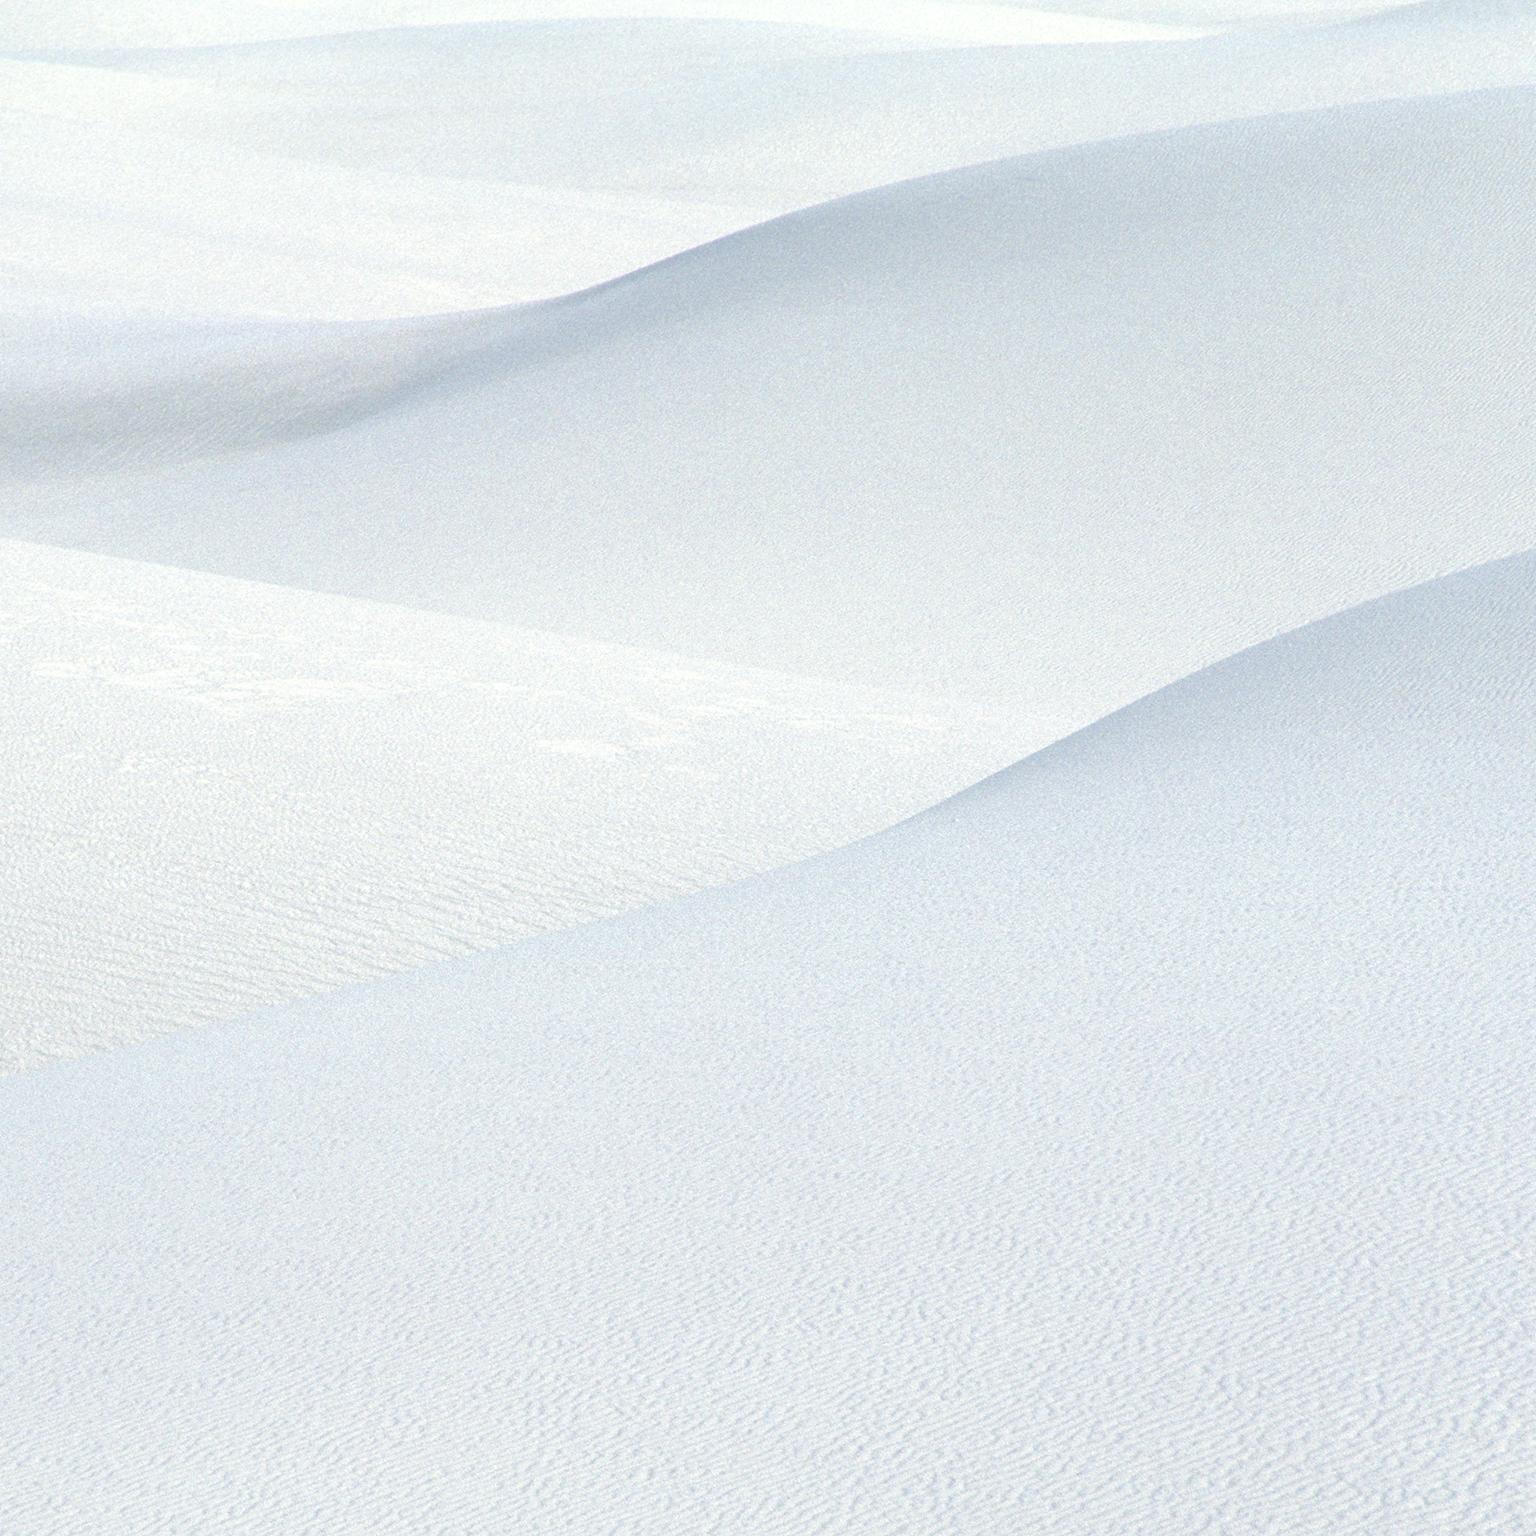 White Sands National Park, USA, 2004, Ver. 2 - Photograph by  Cosmo Condina